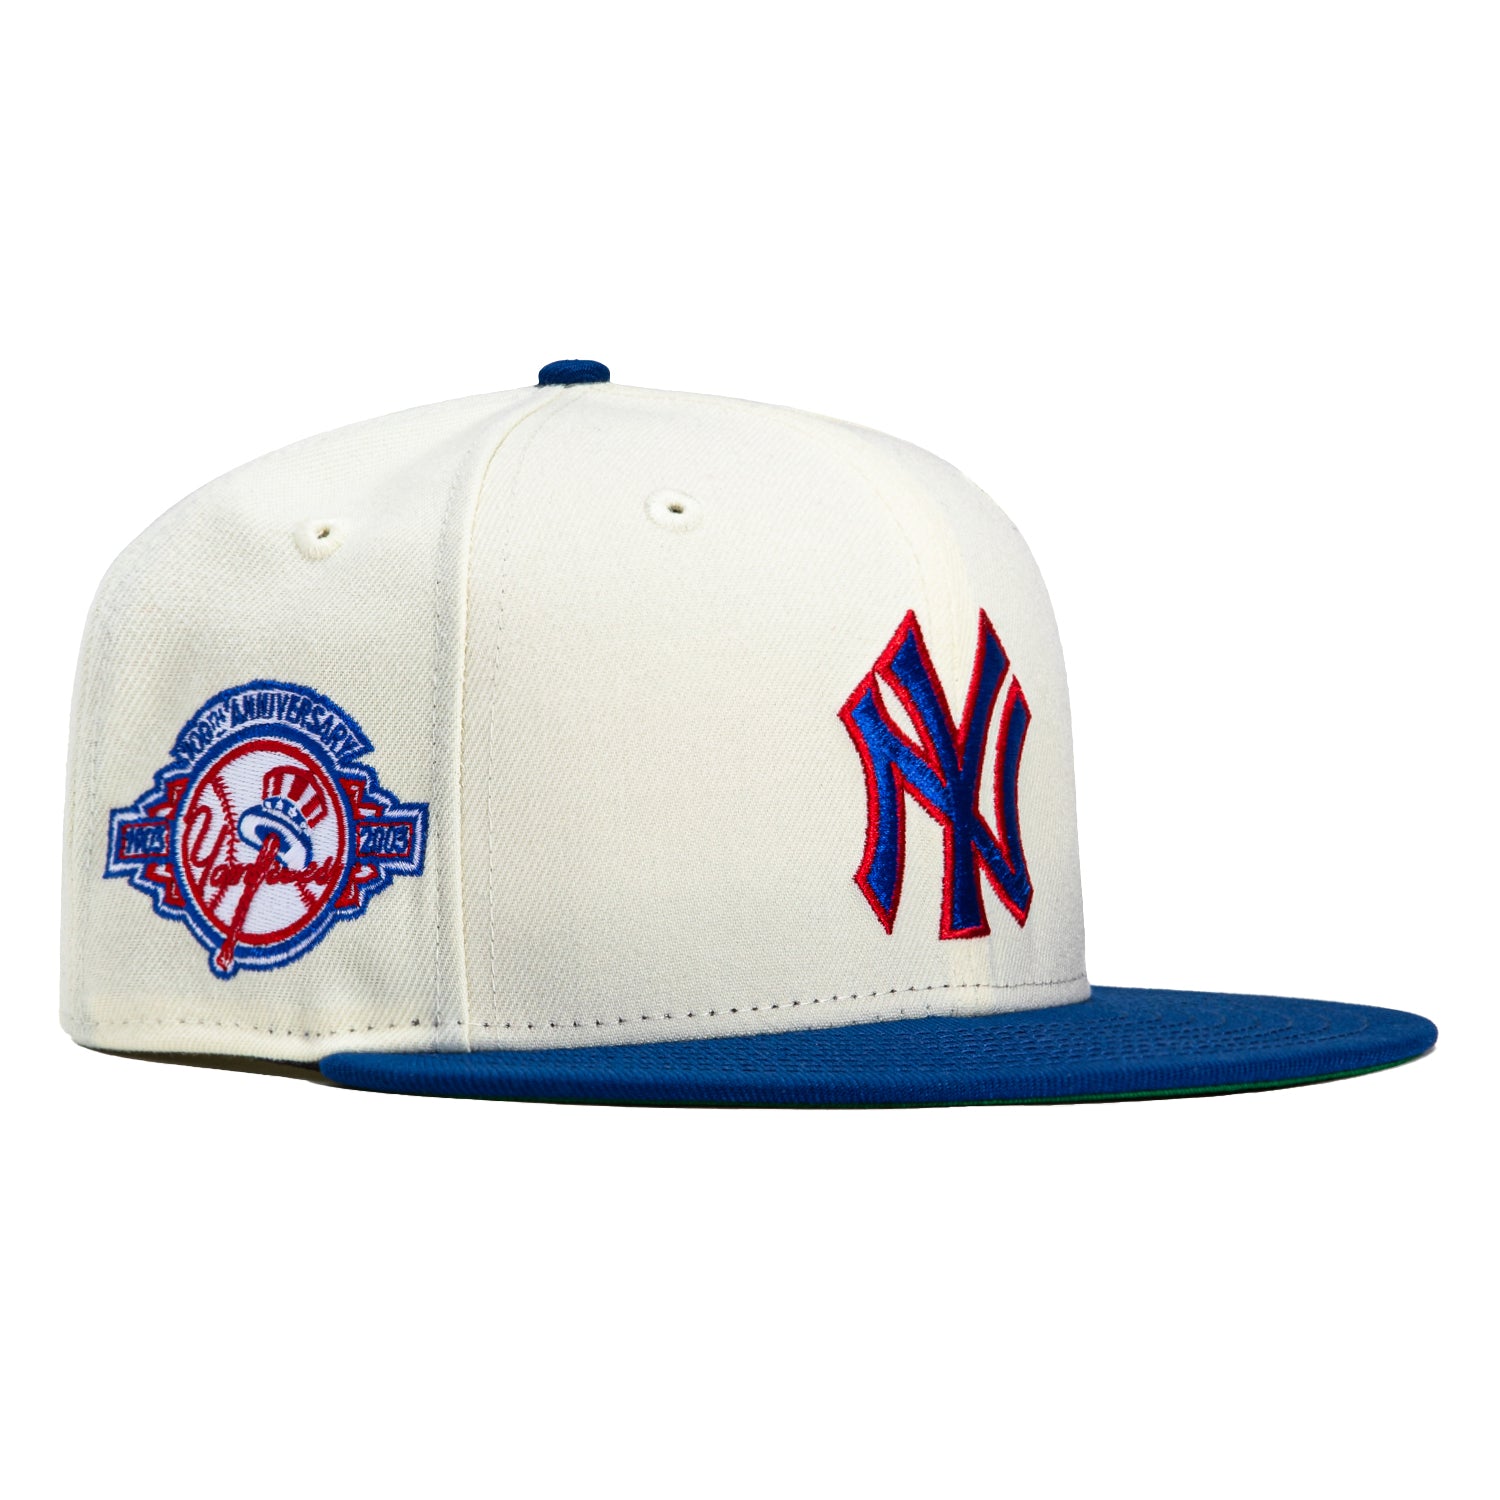 New Era 59FIFTY New York Yankees 100th Anniversary Patch Hat - White, Royal, Red White/Royal/Red / 8